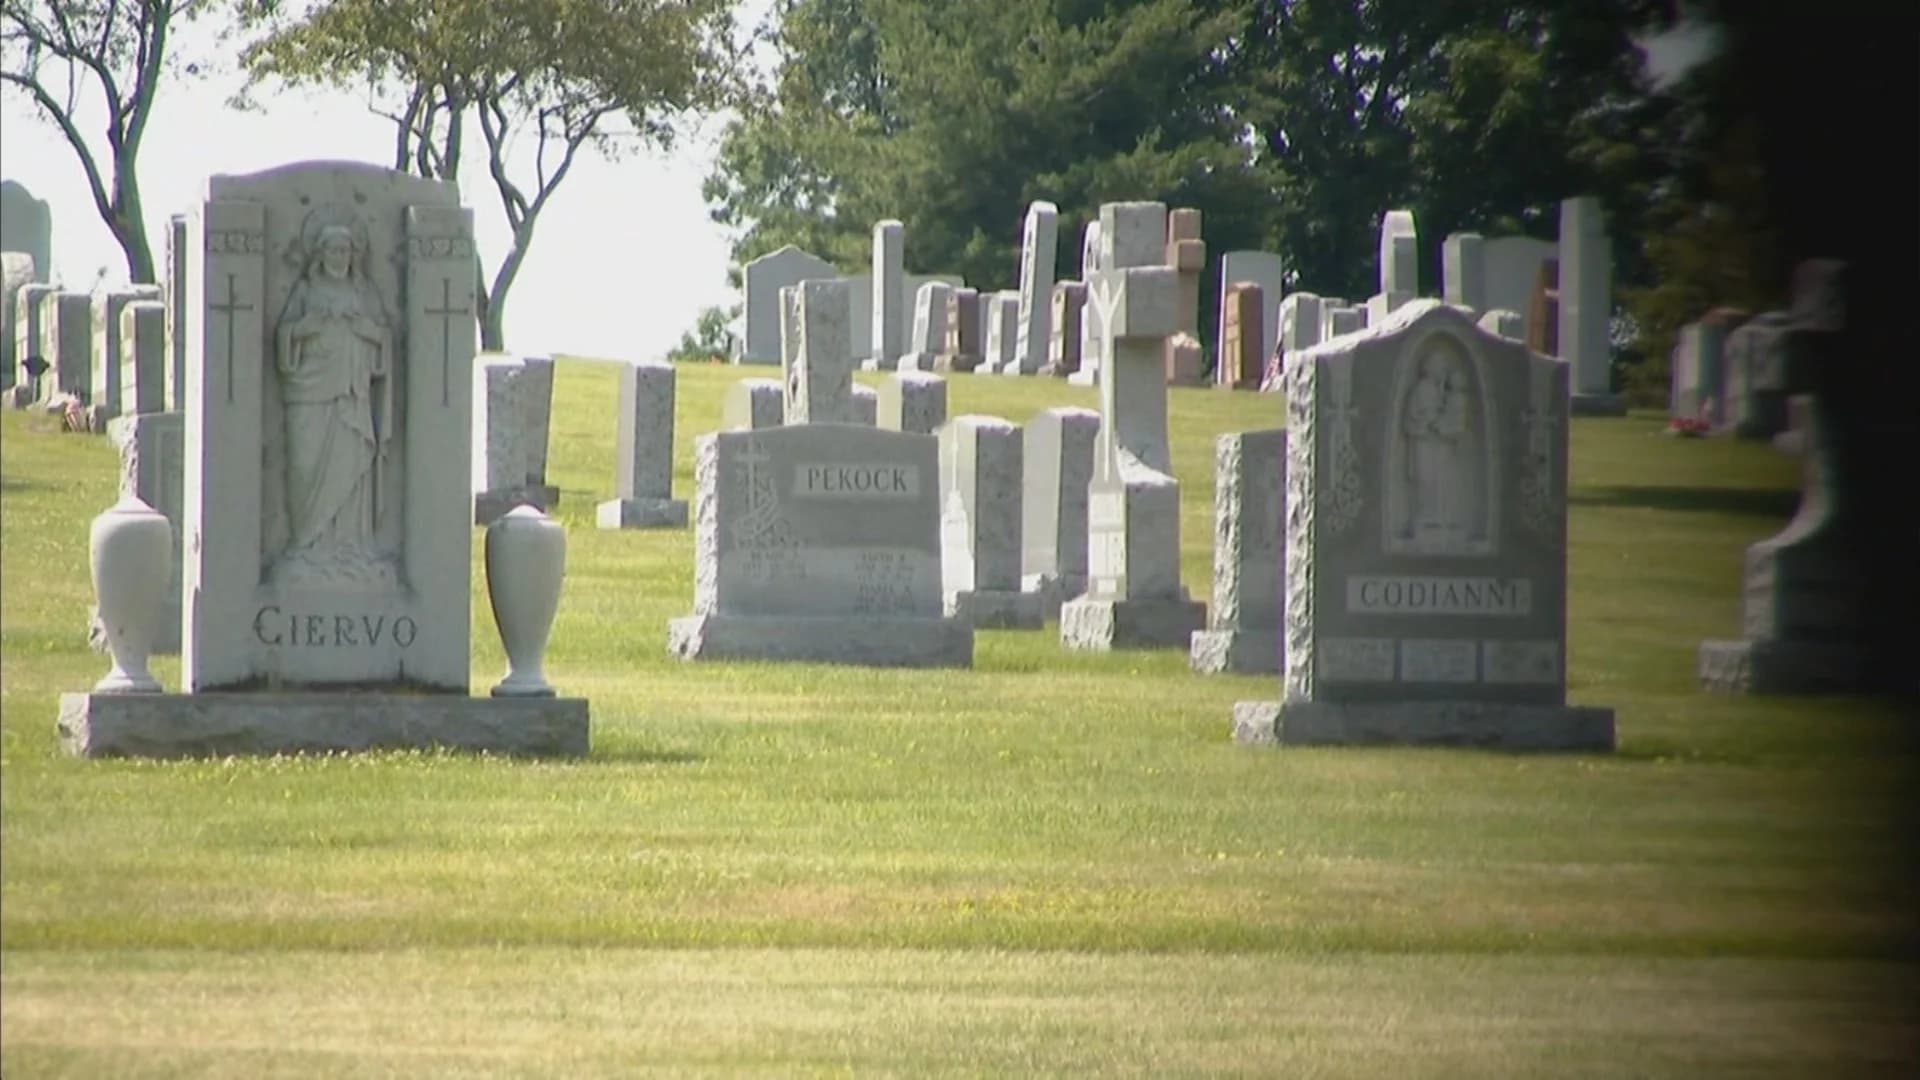 Several gravesites found painted with swastikas in Watertown